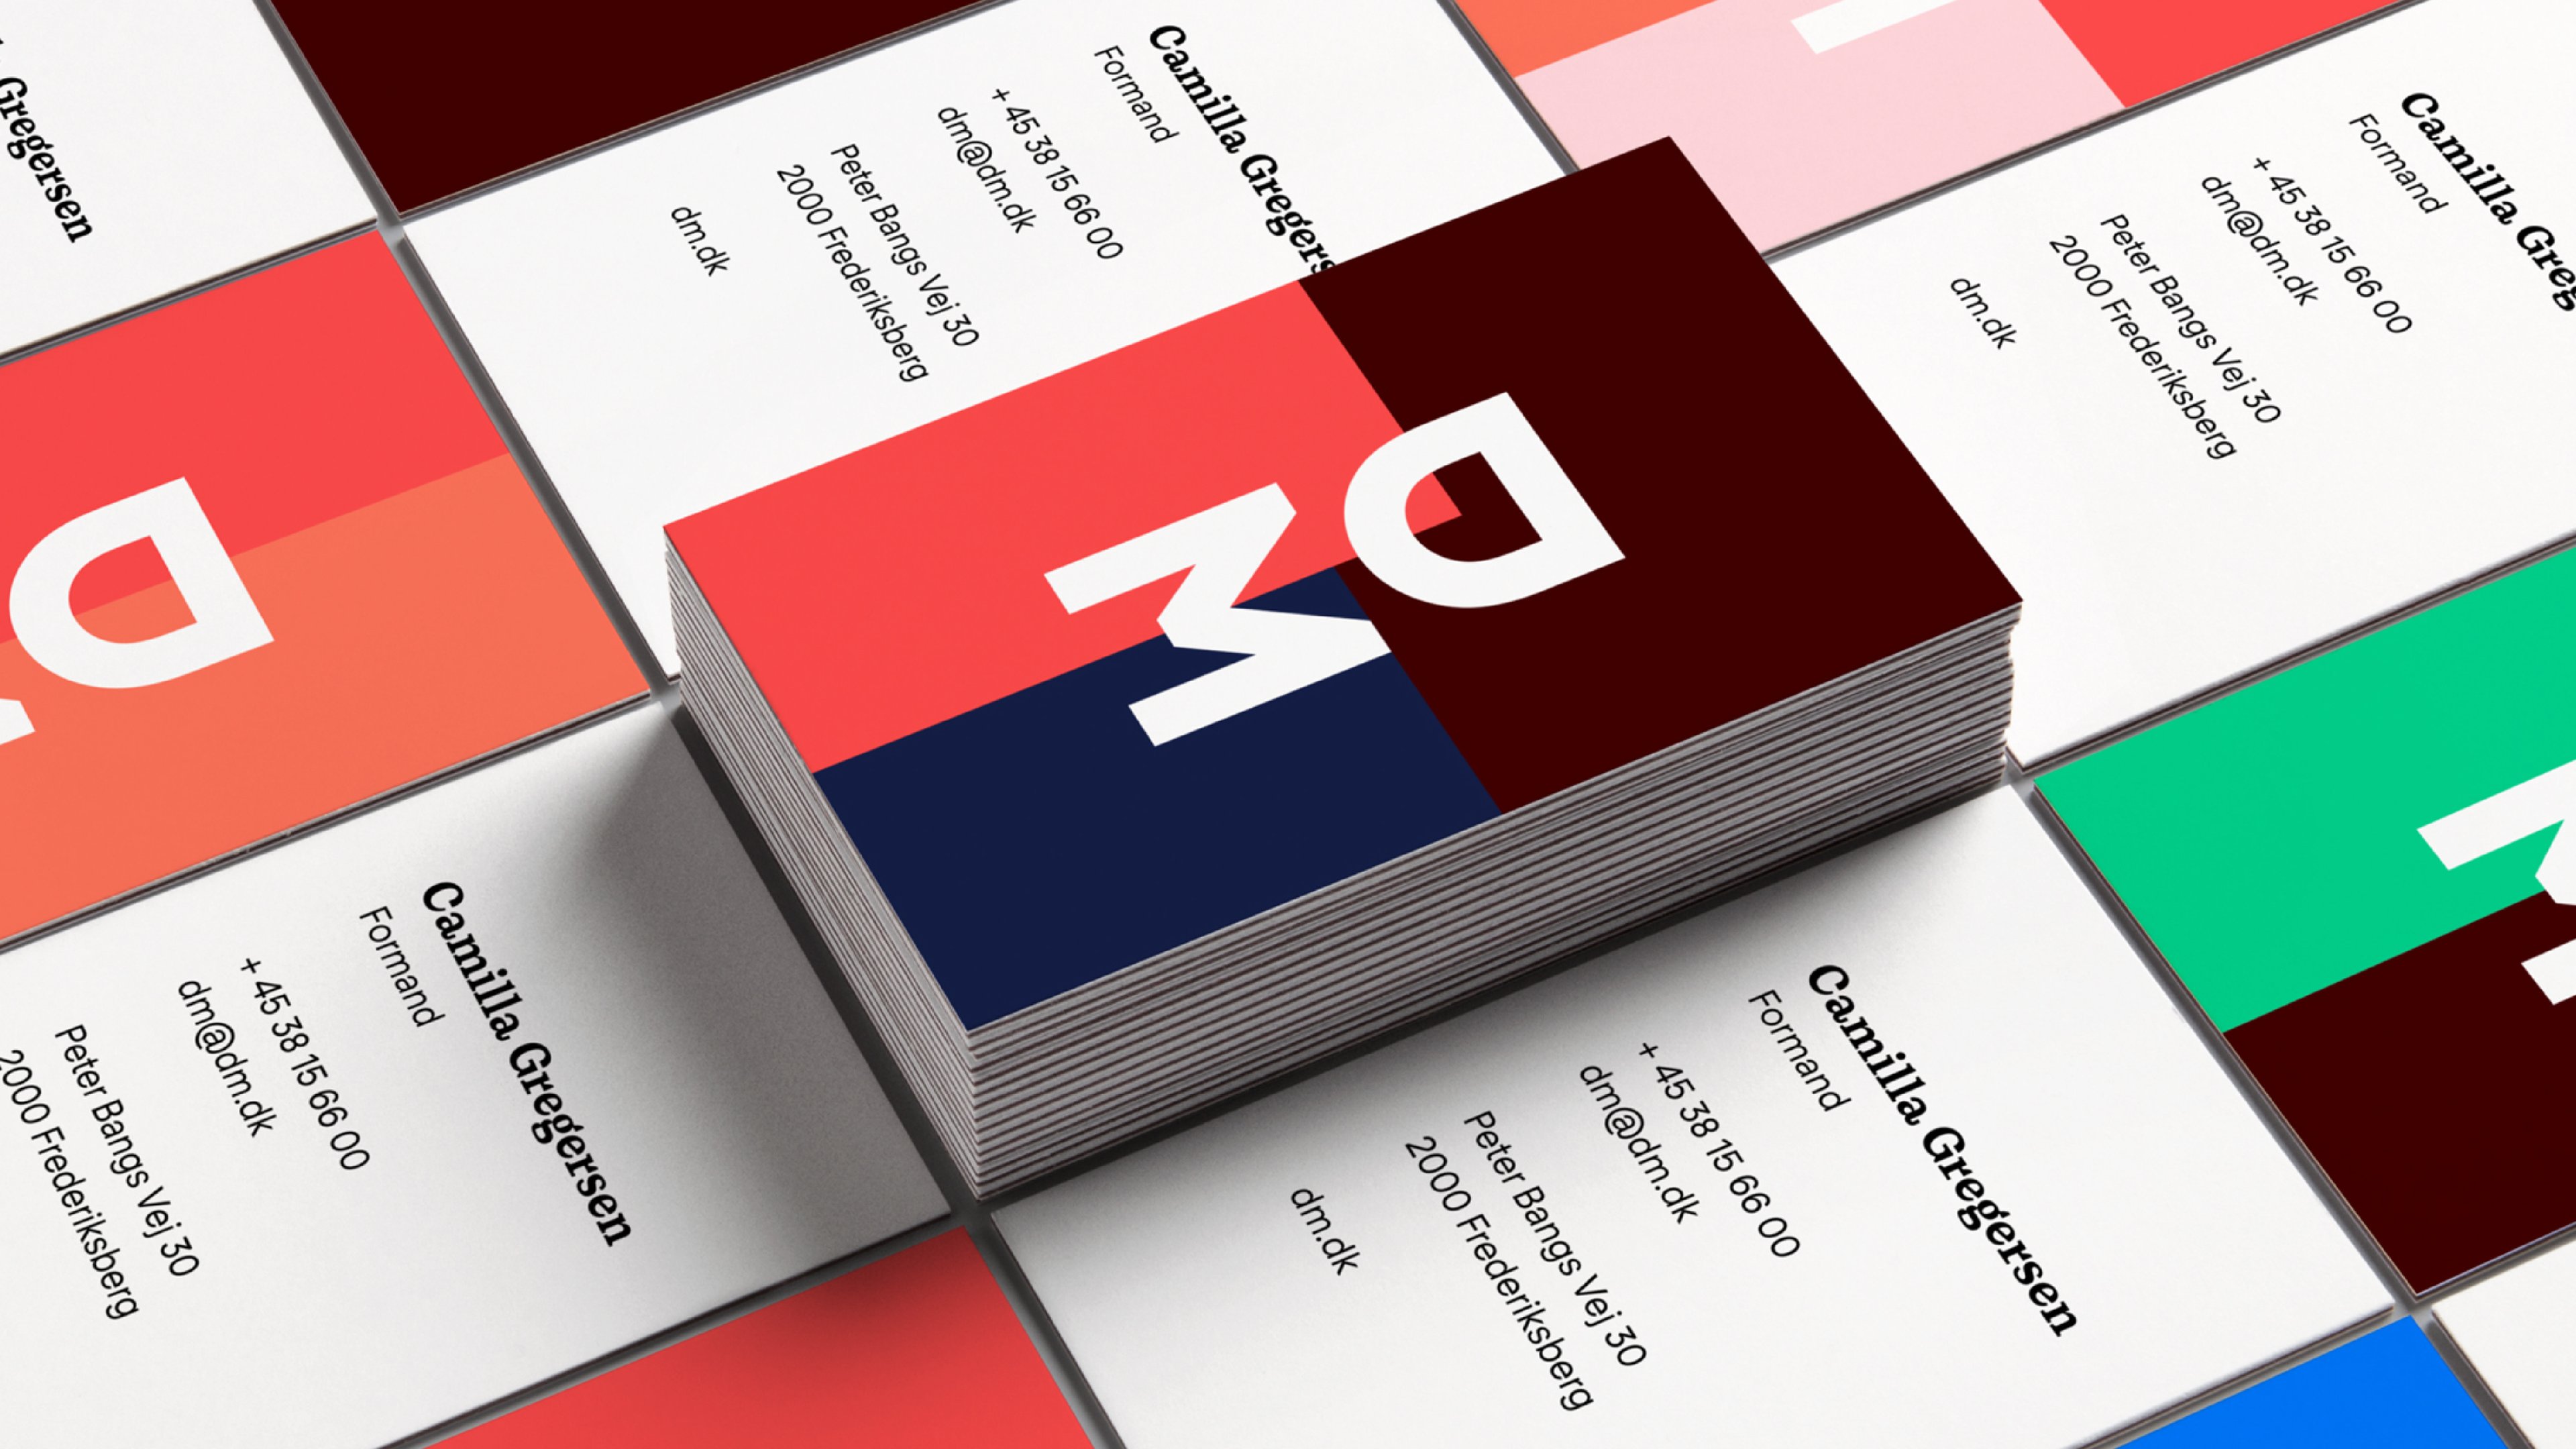 A versatile identity for a multi-talented organisation